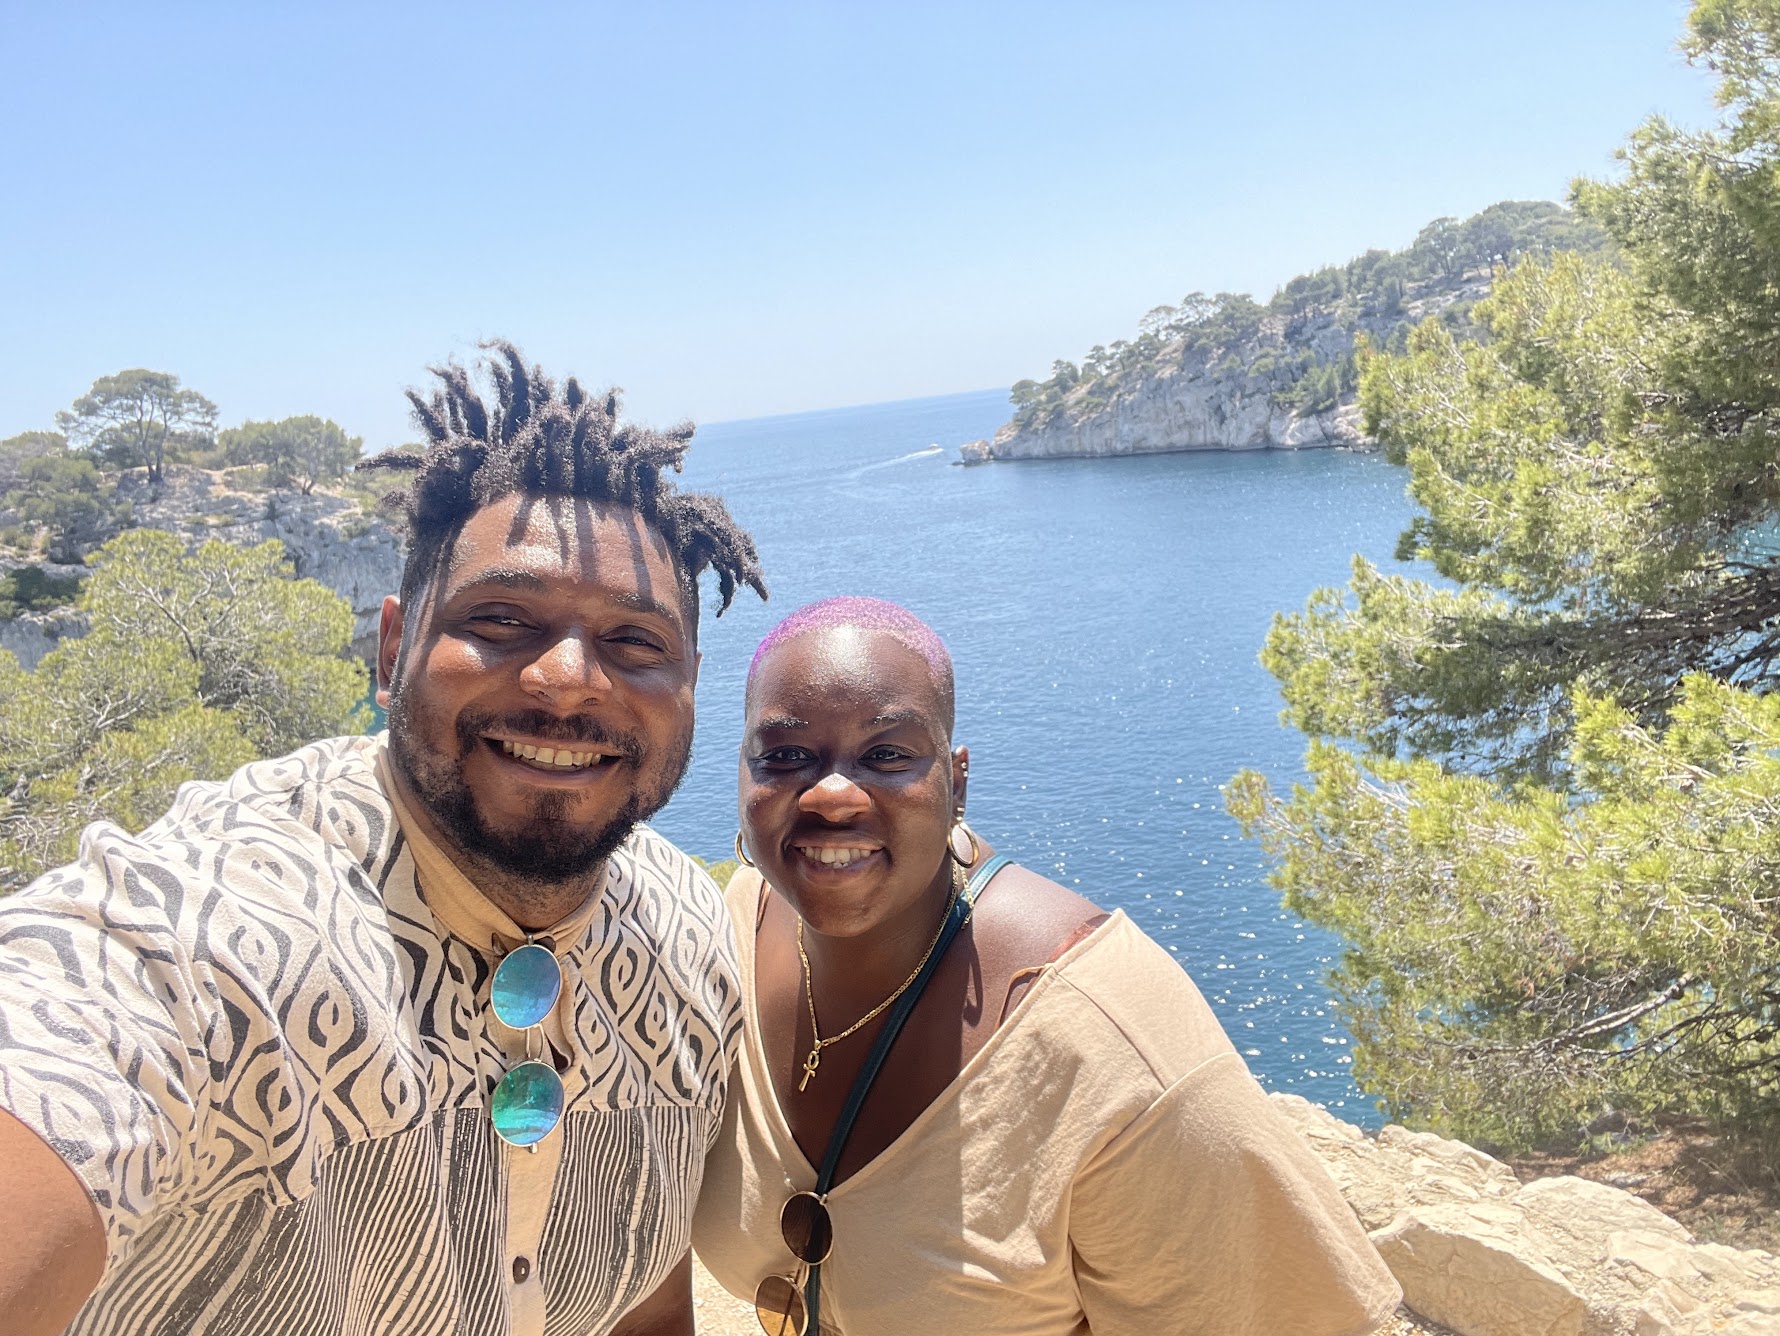  Two smiley, Black folks, taking a selfie. Cliff recede in the background, as foliage wraps the edges of the photograph. Directly behind them sits a very blue body of water, the Mediterranean Ocean. 